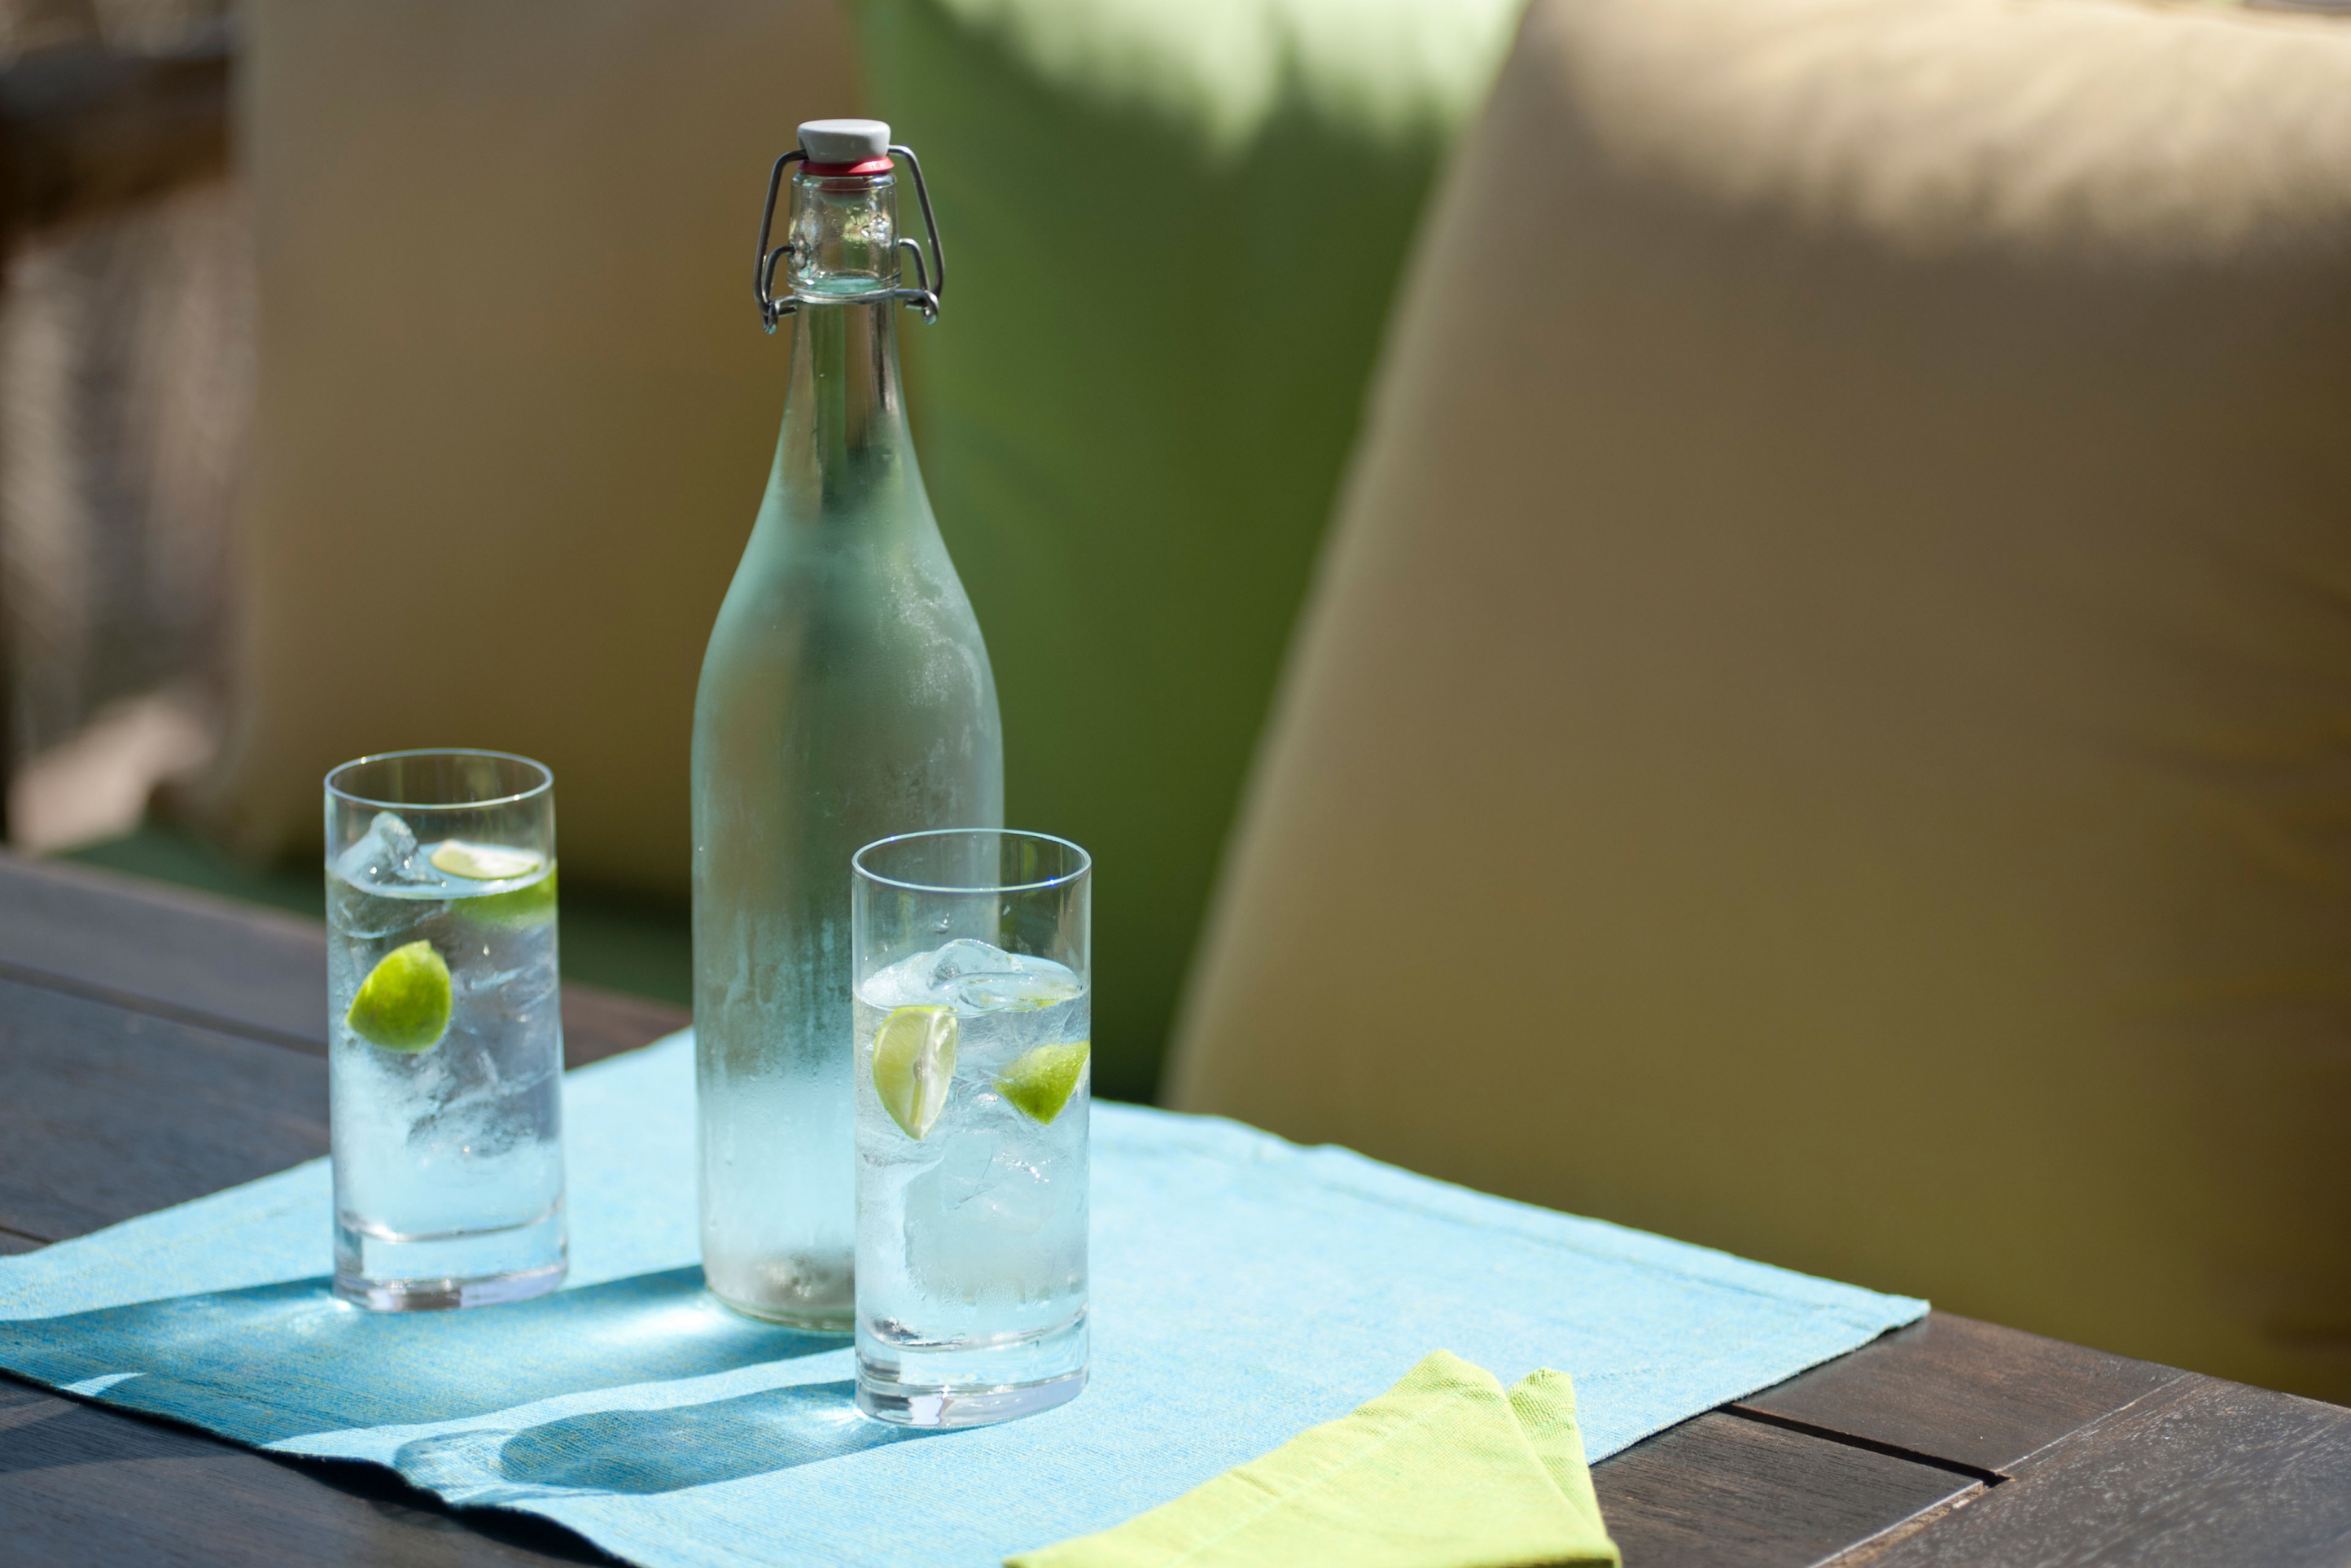 Six Senses was one of the first hotel companies to replace plastic water bottles with reusable glass bottles. Click to enlarge.